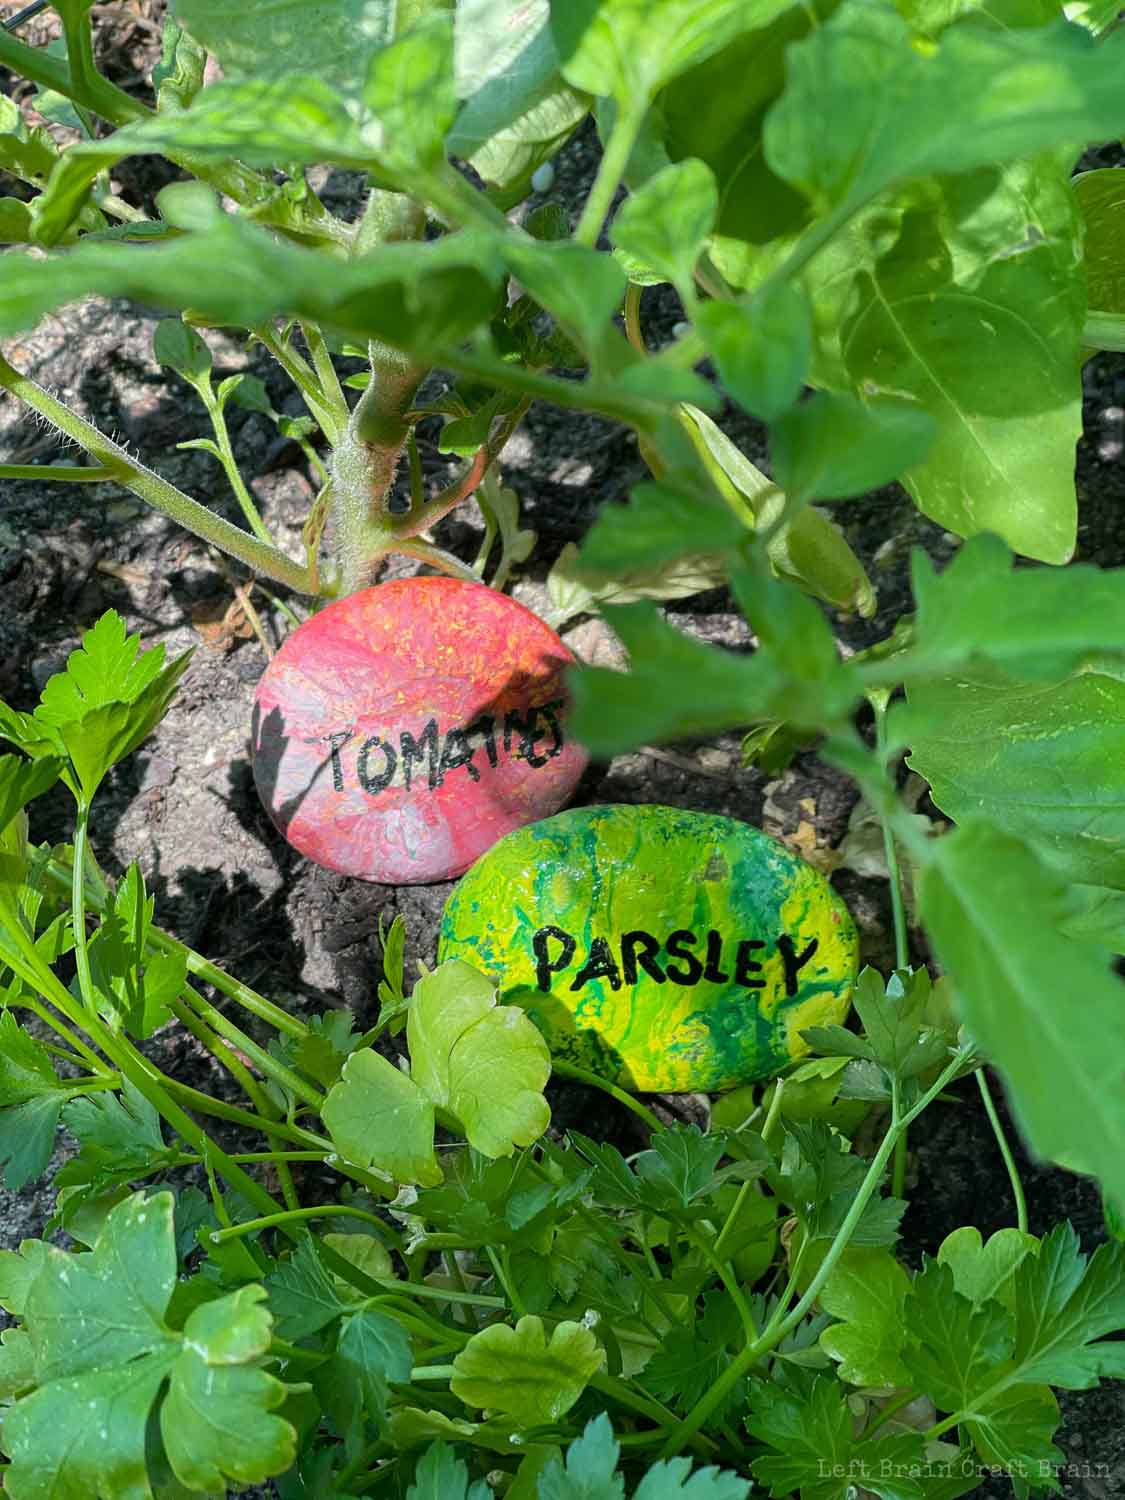 red, green, and yellow painted rocks in soil tomatoes and parsley pour painted rock garden markers